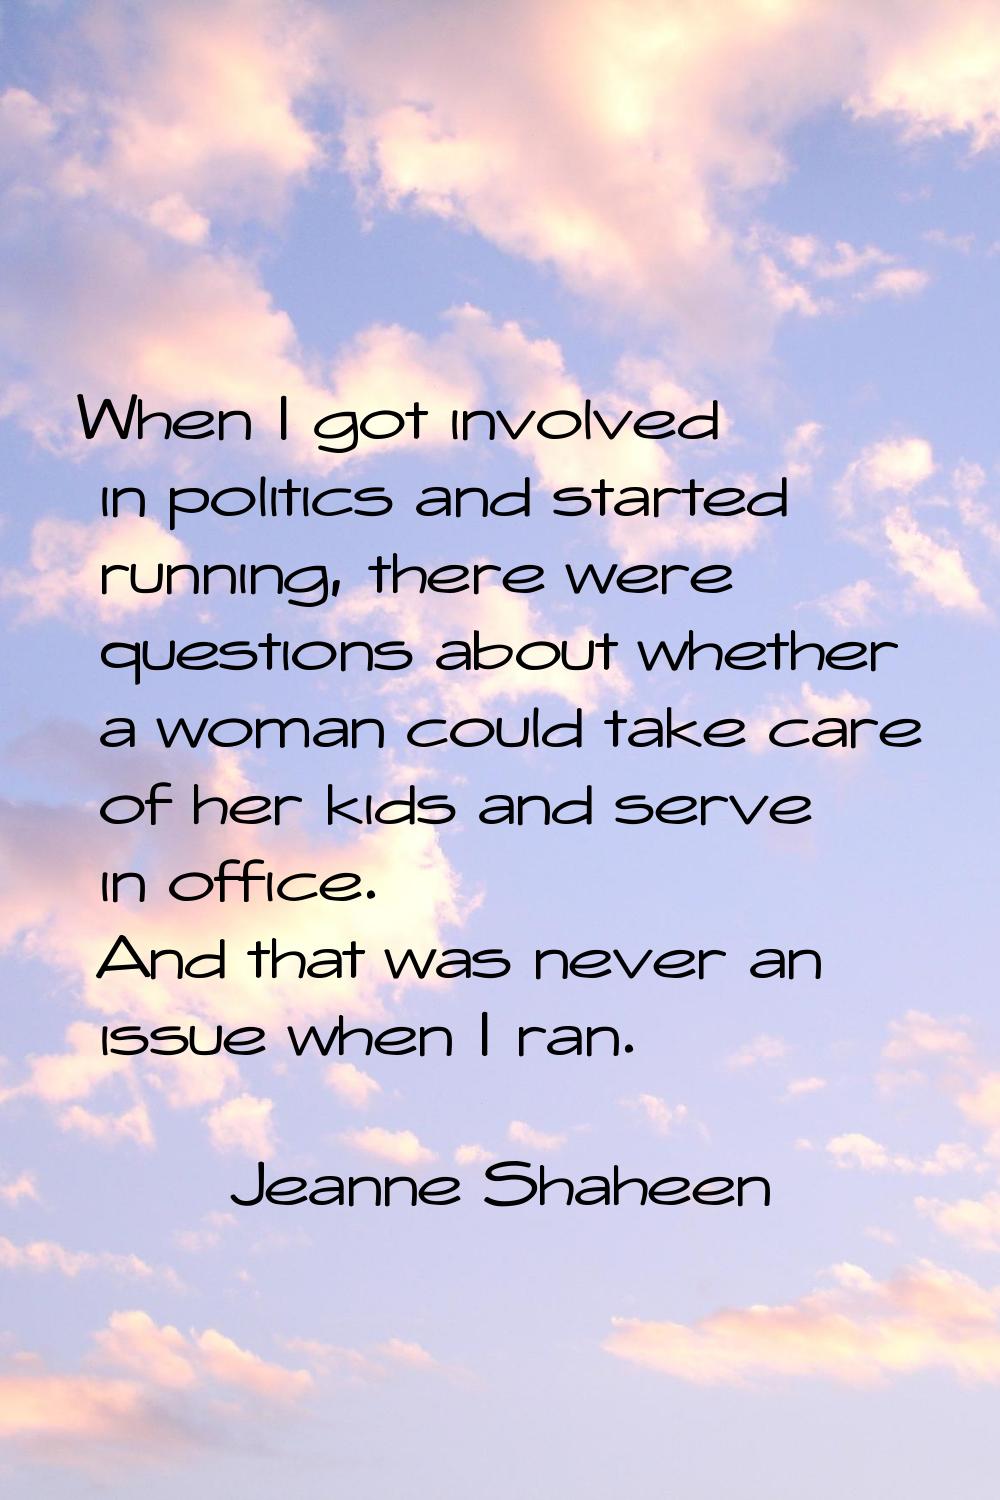 When I got involved in politics and started running, there were questions about whether a woman cou